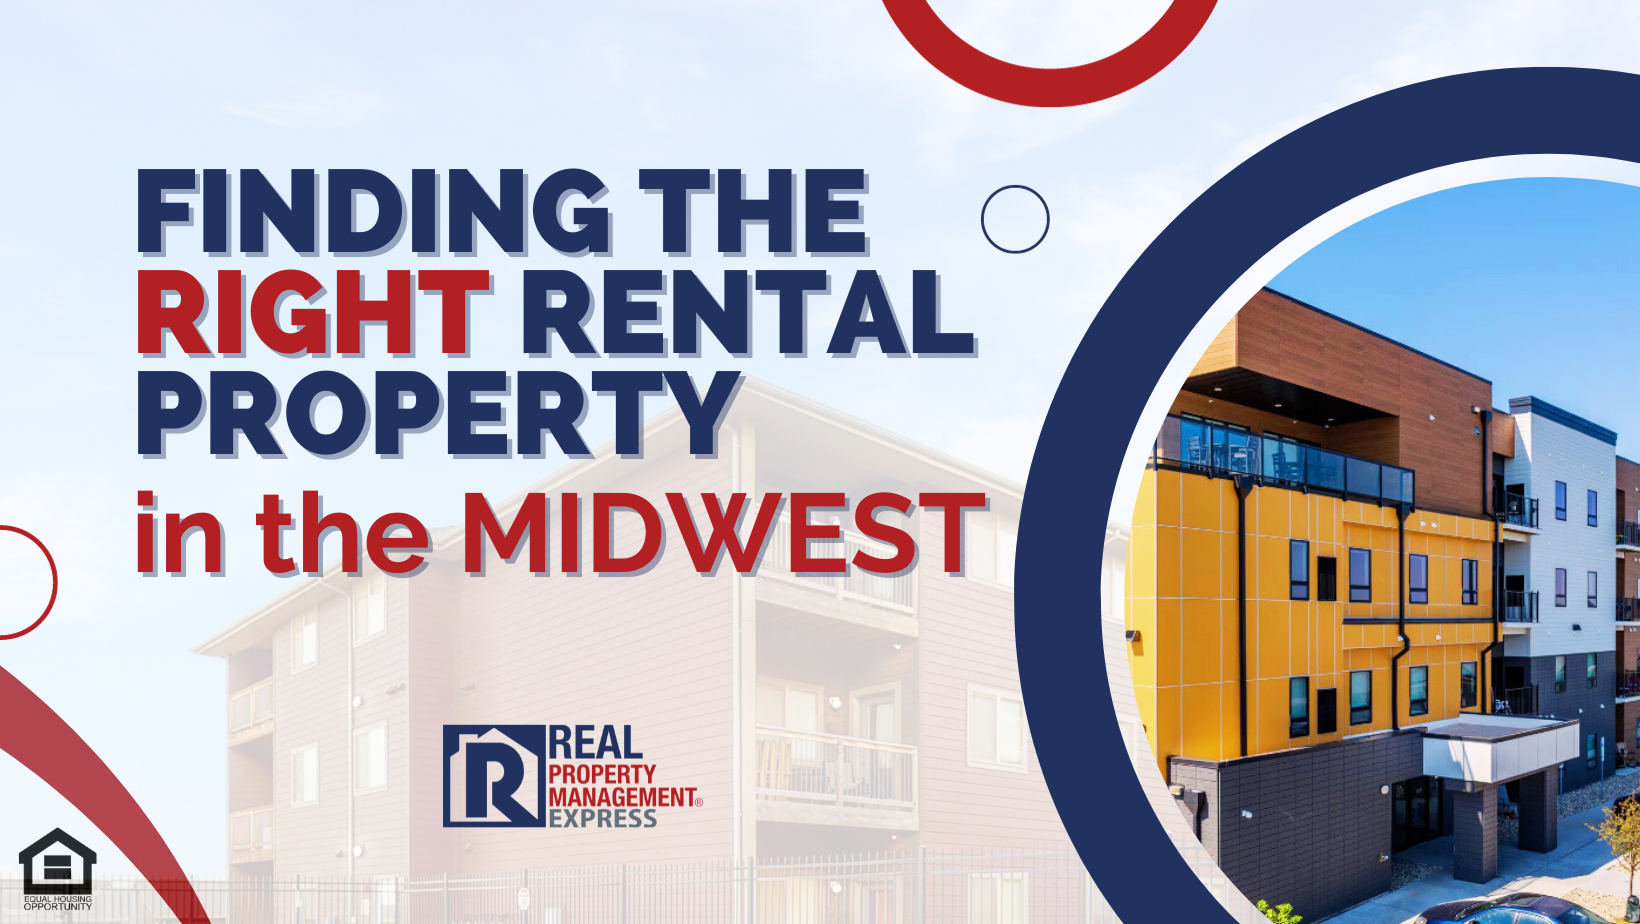 Finding the Right Rental Property in The Midwest